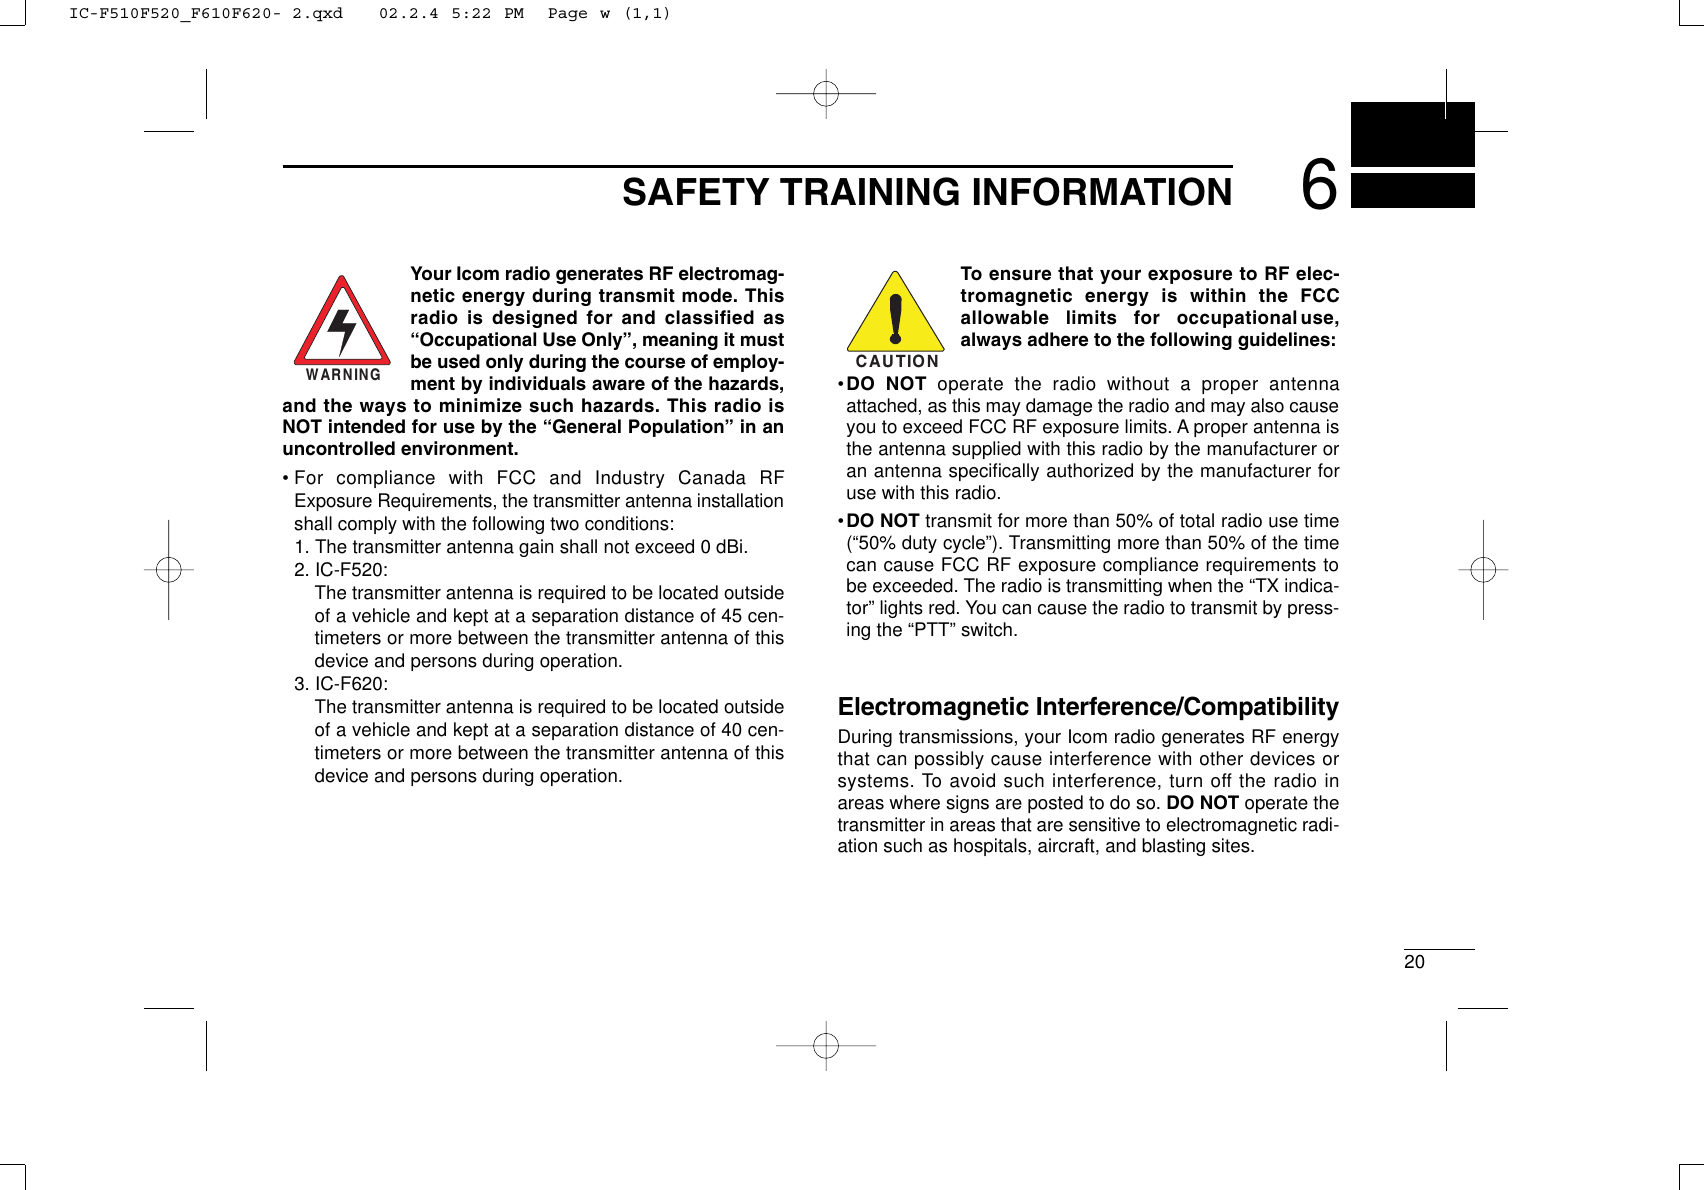 200206SAFETY TRAINING INFORMATIONYour Icom radio generates RF electromag-netic energy during transmit mode. Thisradio is designed for and classified as“Occupational Use Only”, meaning it mustbe used only during the course of employ-ment by individuals aware of the hazards,and the ways to minimize such hazards. This radio isNOT intended for use by the “General Population” in anuncontrolled environment.• For compliance with FCC and Industry Canada RFExposure Requirements, the transmitter antenna installationshall comply with the following two conditions:1. The transmitter antenna gain shall not exceed 0 dBi.2. IC-F520:The transmitter antenna is required to be located outsideof a vehicle and kept at a separation distance of 45 cen-timeters or more between the transmitter antenna of thisdevice and persons during operation.3. IC-F620:The transmitter antenna is required to be located outsideof a vehicle and kept at a separation distance of 40 cen-timeters or more between the transmitter antenna of thisdevice and persons during operation.To ensure that your exposure to RF elec-tromagnetic energy is within the FCCallowable limits for occupational use,always adhere to the following guidelines:•DO NOT operate the radio without a proper antennaattached, as this may damage the radio and may also causeyou to exceed FCC RF exposure limits. A proper antenna isthe antenna supplied with this radio by the manufacturer oran antenna speciﬁcally authorized by the manufacturer foruse with this radio.•DO NOT transmit for more than 50% of total radio use time(“50% duty cycle”). Transmitting more than 50% of the timecan cause FCC RF exposure compliance requirements tobe exceeded. The radio is transmitting when the “TX indica-tor” lights red. You can cause the radio to transmit by press-ing the “PTT” switch.Electromagnetic Interference/CompatibilityDuring transmissions, your Icom radio generates RF energythat can possibly cause interference with other devices orsystems. To avoid such interference, turn off the radio inareas where signs are posted to do so. DO NOT operate thetransmitter in areas that are sensitive to electromagnetic radi-ation such as hospitals, aircraft, and blasting sites.WARNINGCAUTIONIC-F510F520_F610F620- 2.qxd   02.2.4 5:22 PM  Page w (1,1)